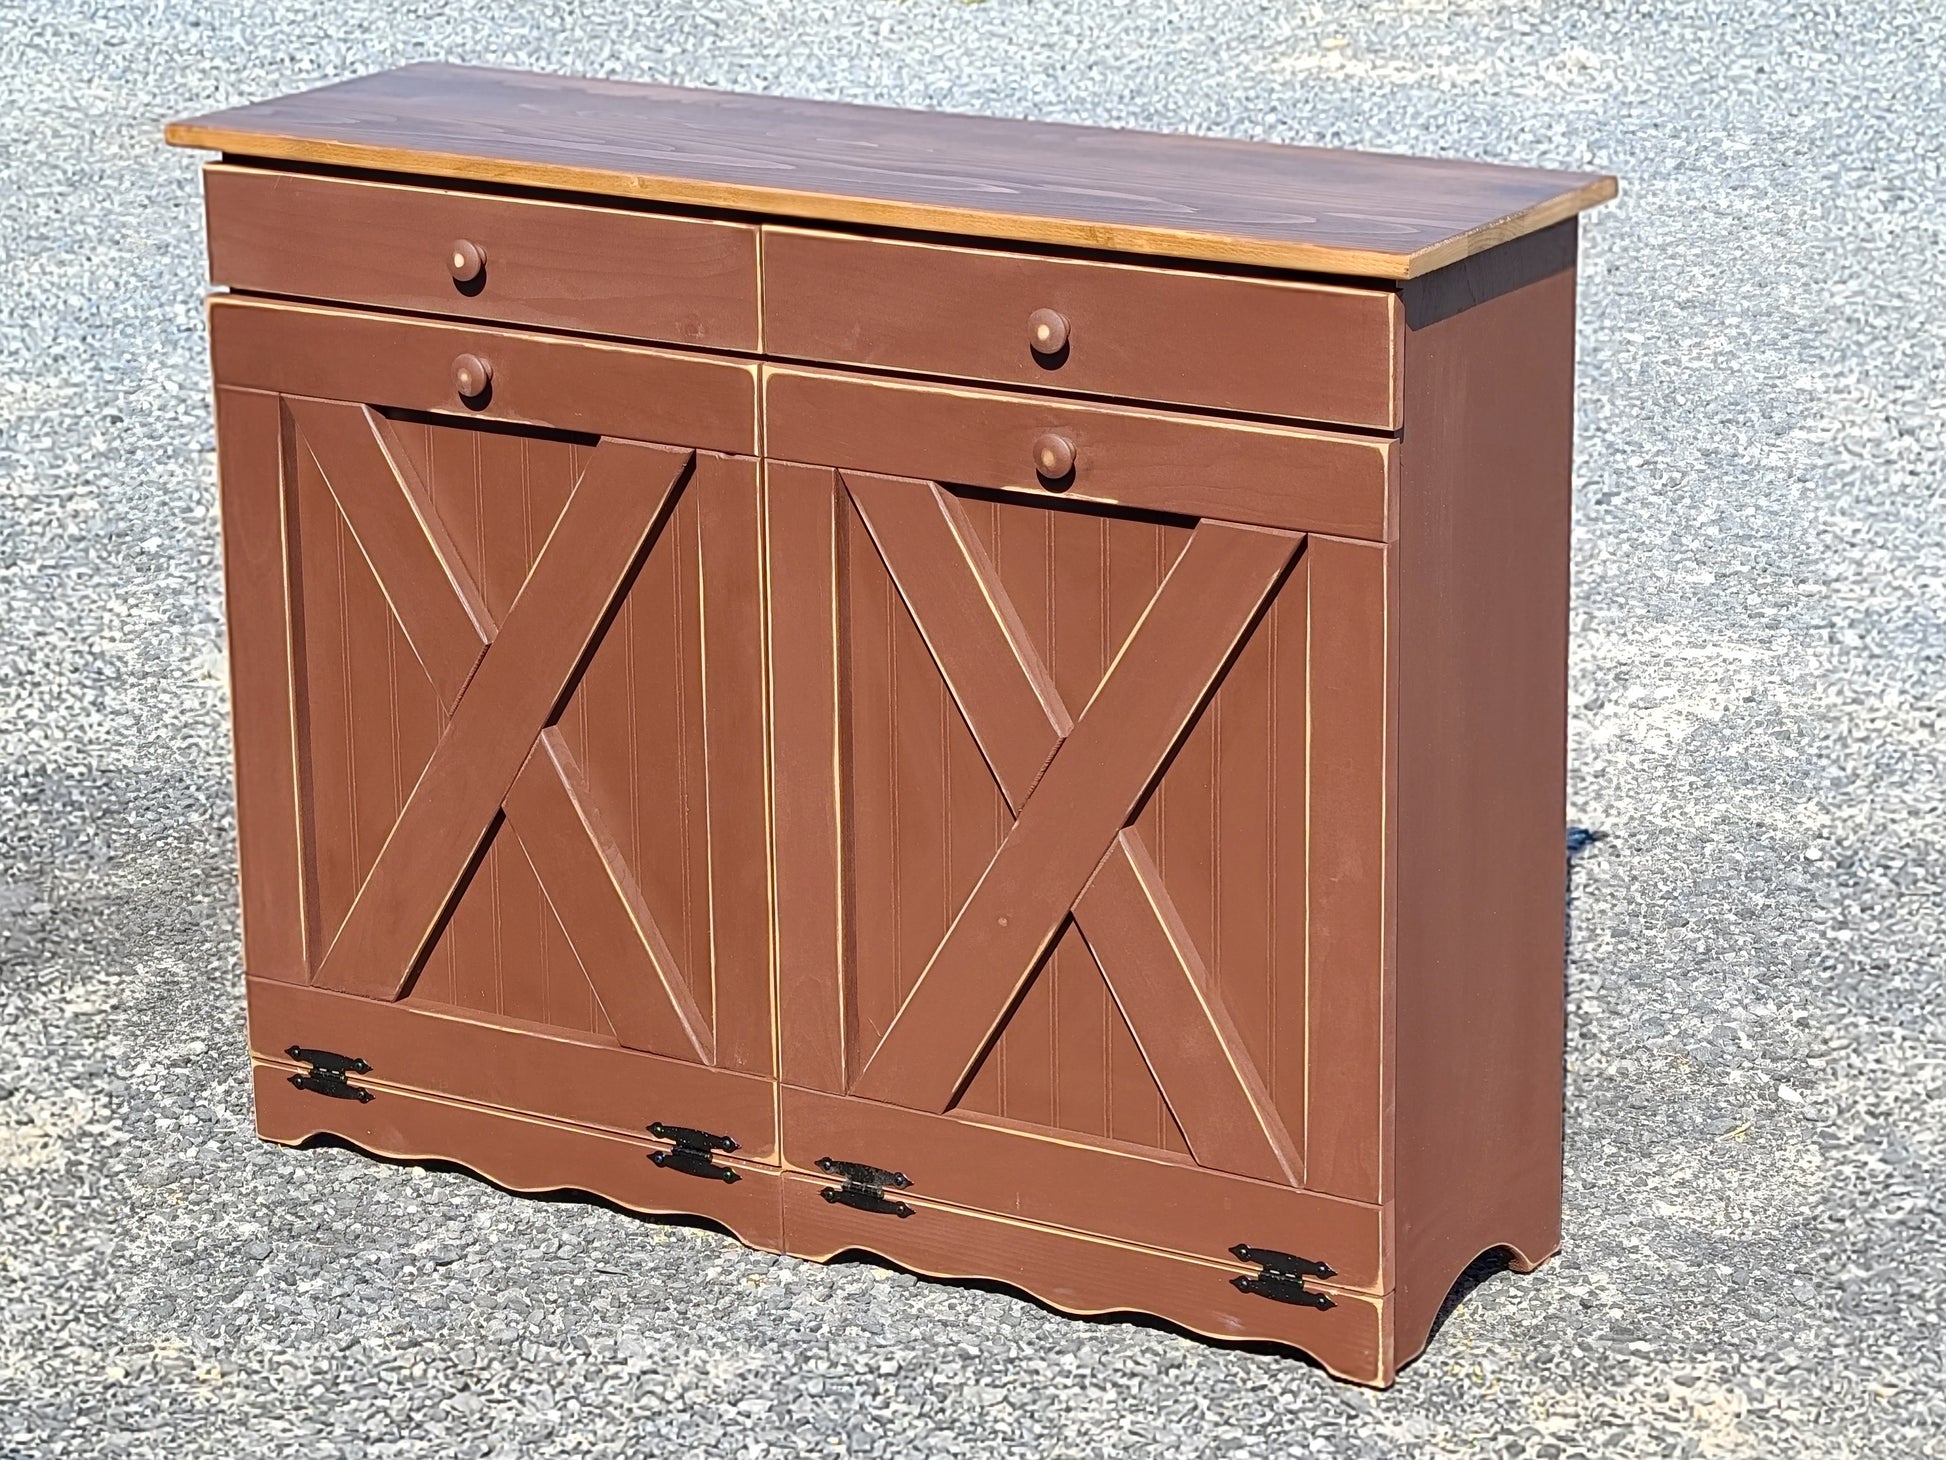 Extra Large Wood Trash Bin Unfinished Trash Can Trash Cabinet With